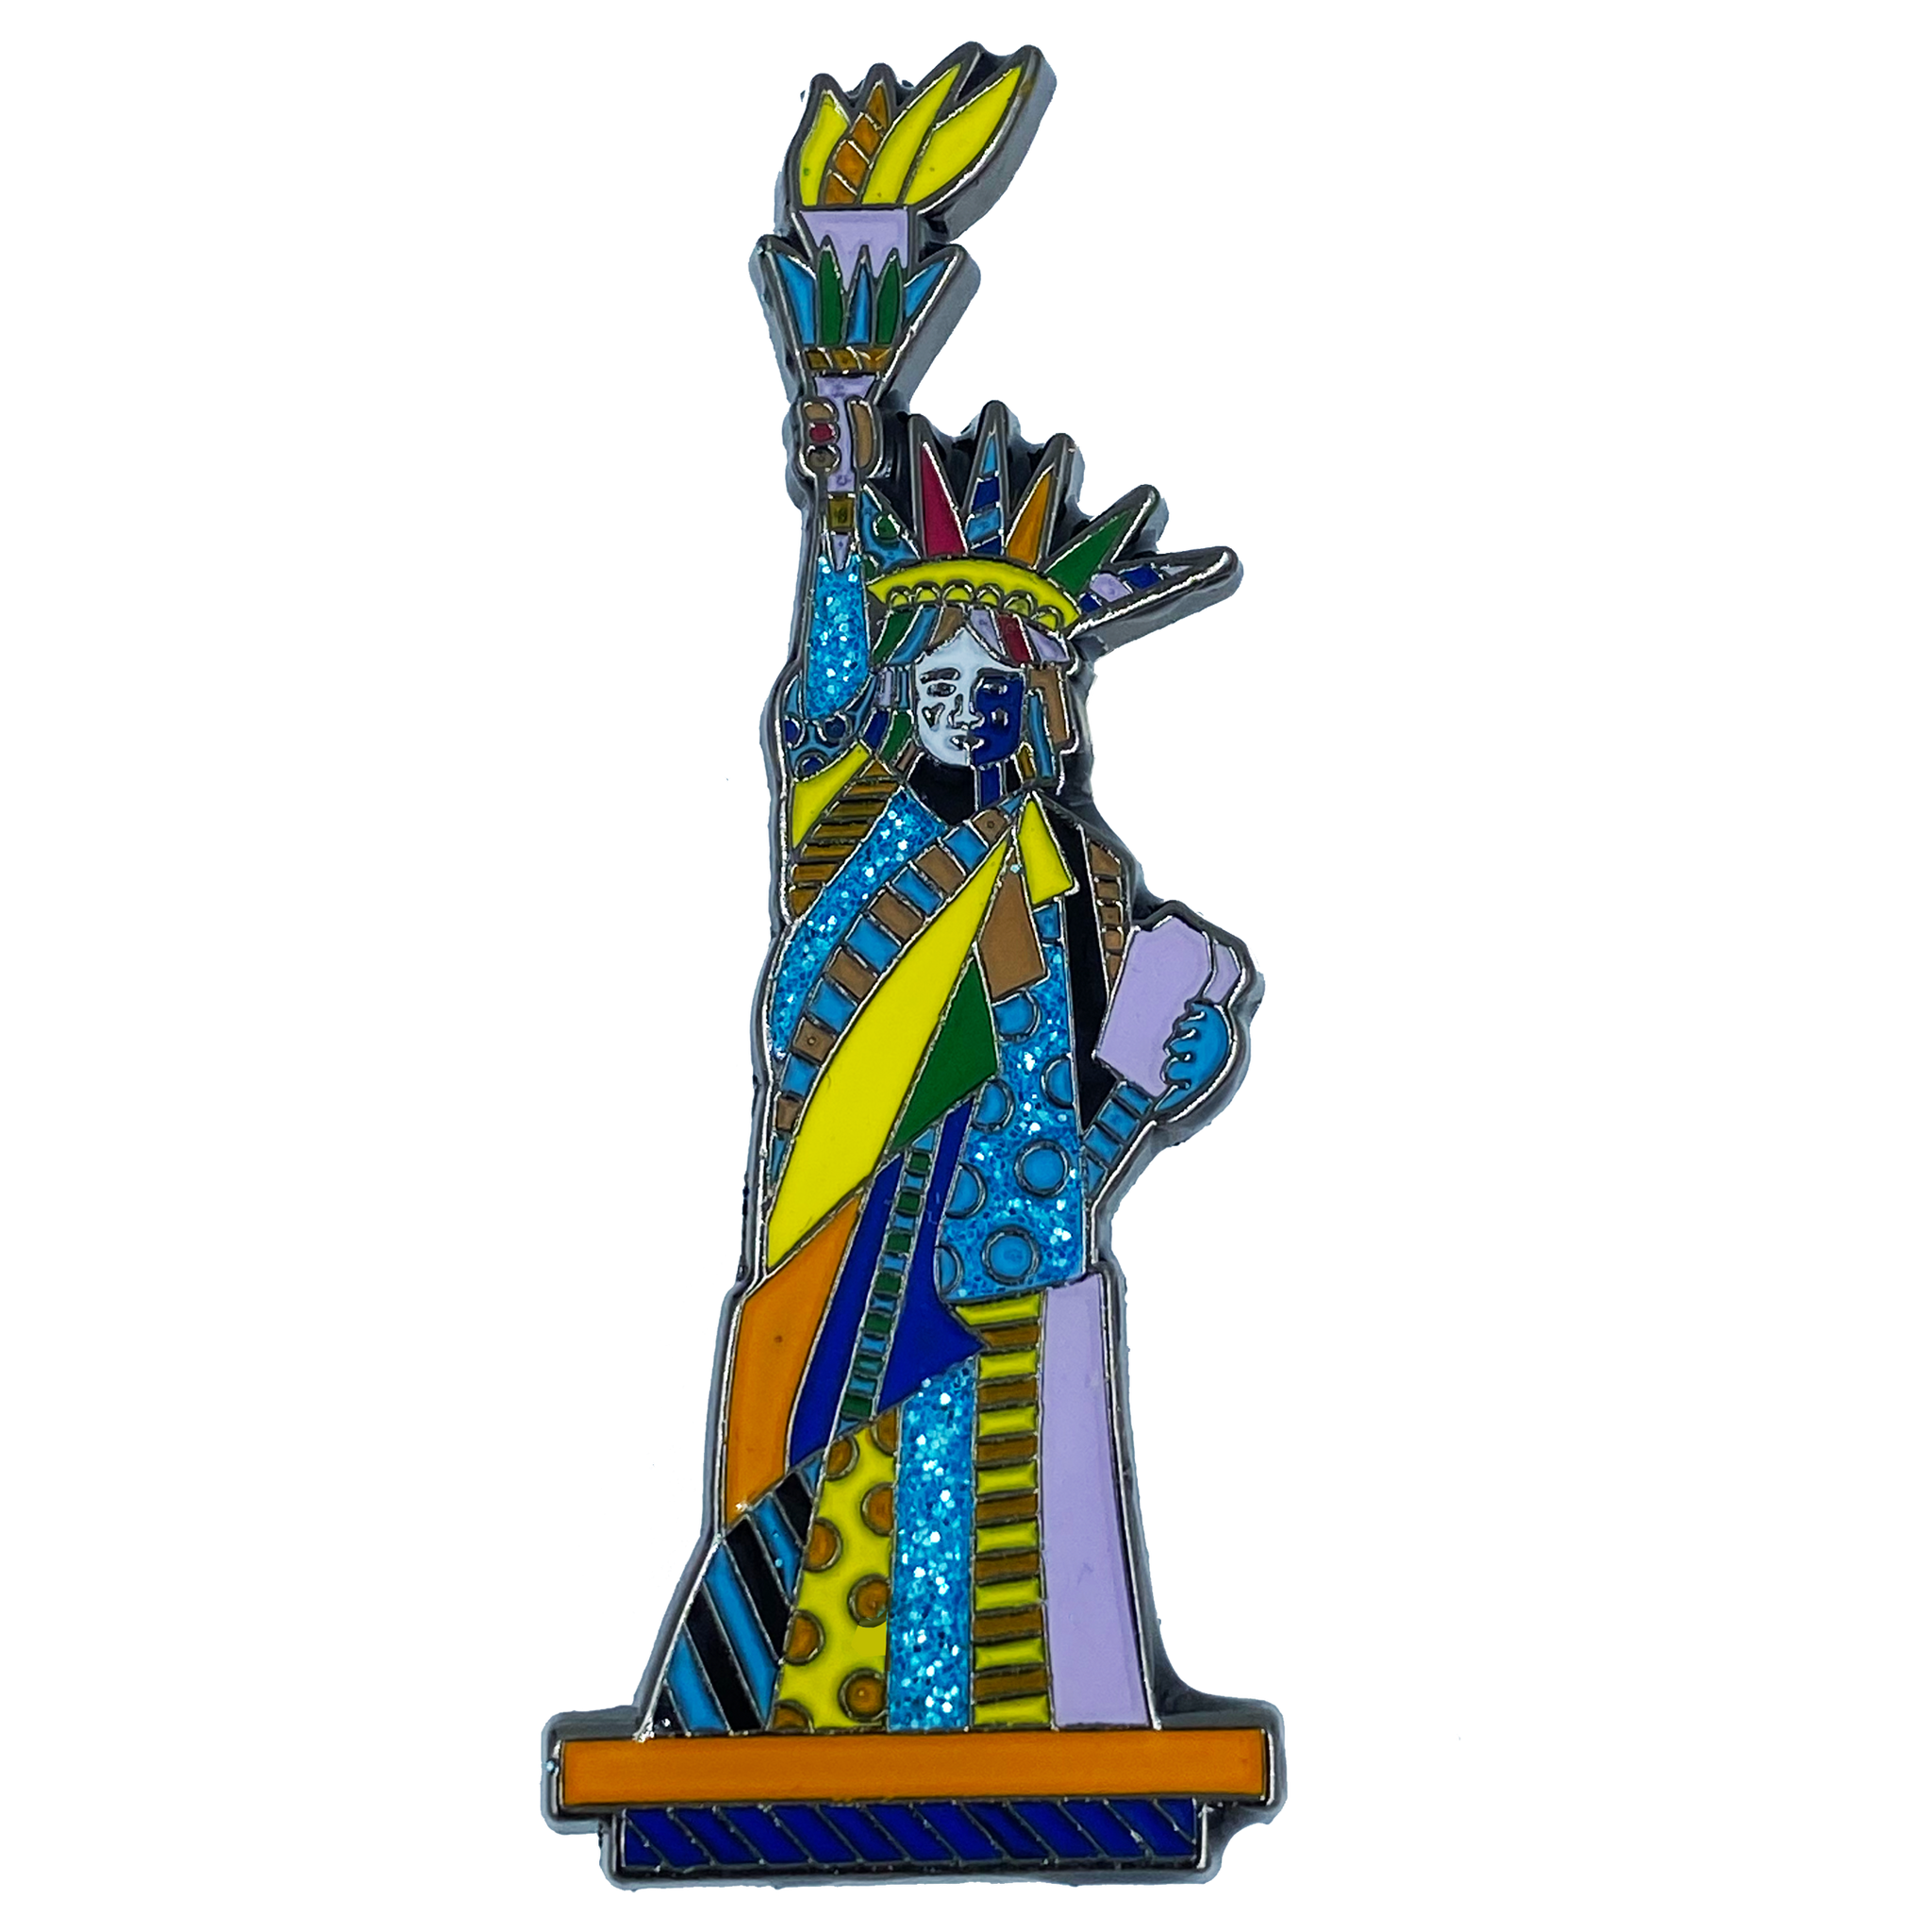 Romero Britto "Lady Love" Officially Authorized Pin Pop Art Statue of Liberty inspired